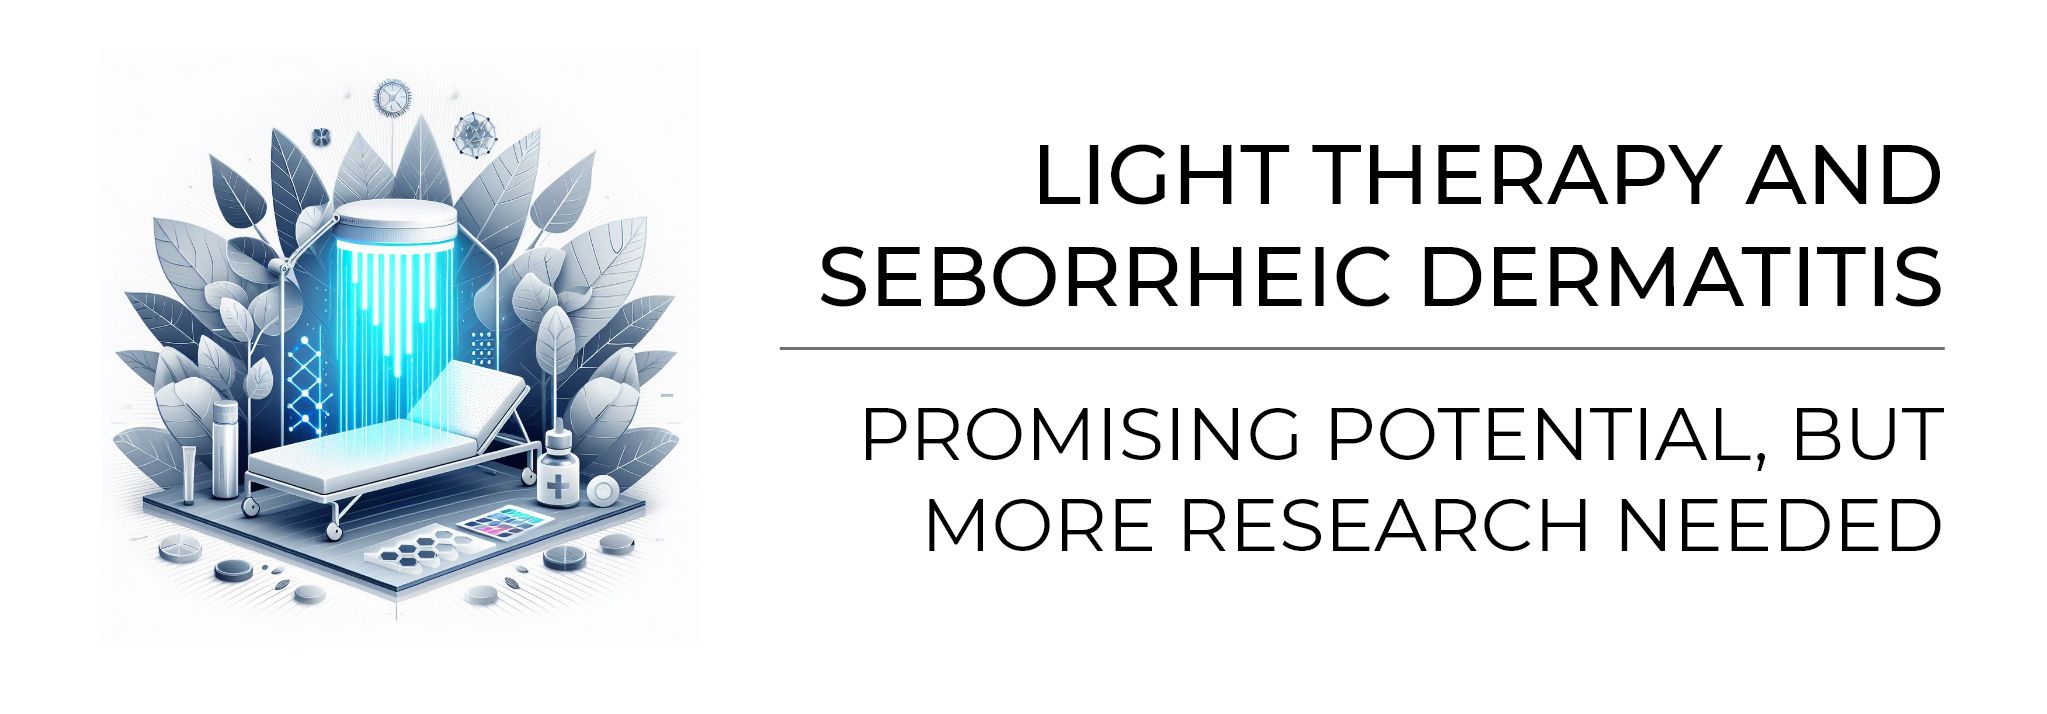 A banner displaying the concluding remarks for the article alongside a graphic representing light therapy. Text reads "Light therapy and seborrheic dermatitis - promising potential, but more research is needed"